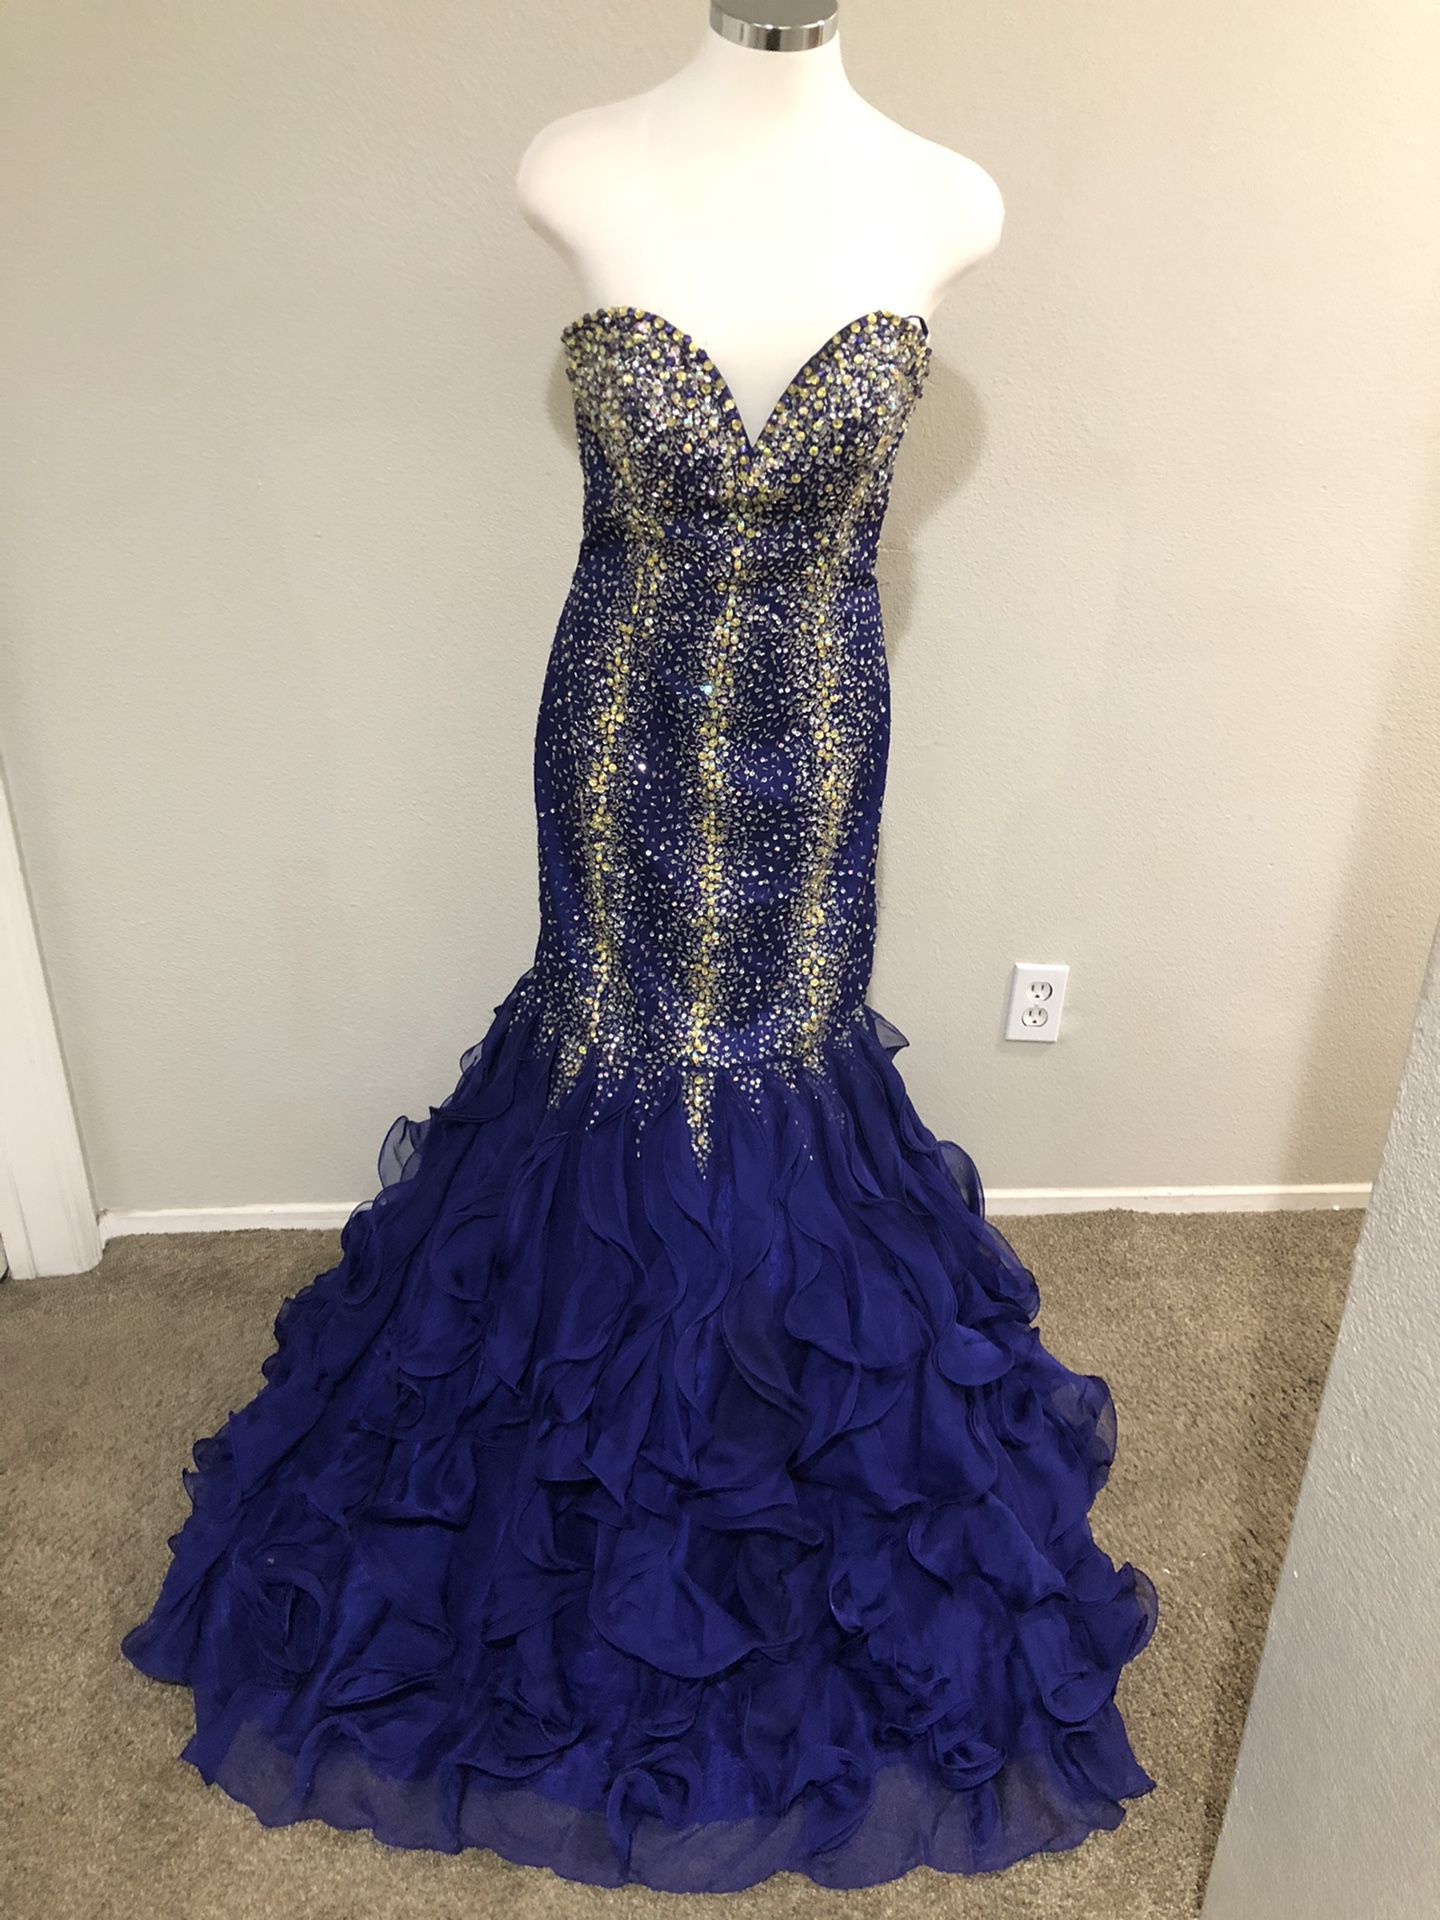 Cinderella Womans Mermaid Dress Size 8. Paid over $499 for it. Great Material